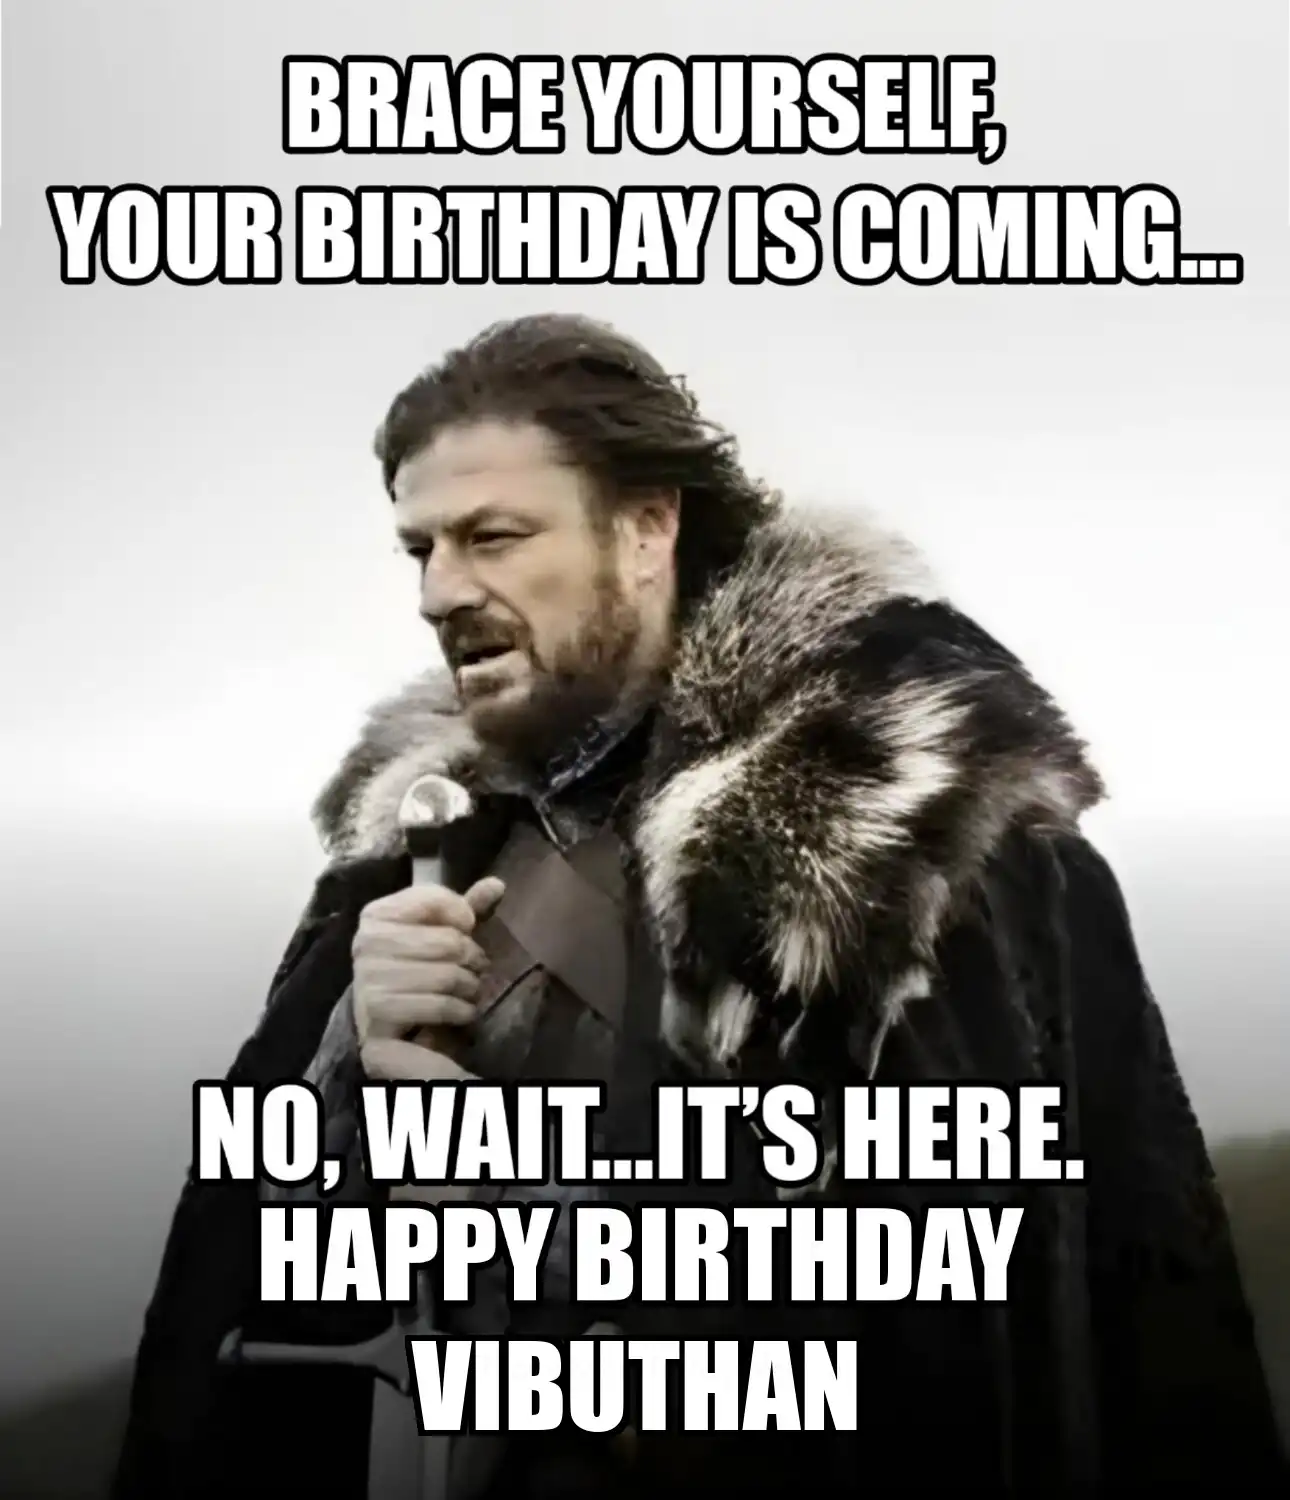 Happy Birthday Vibuthan Brace Yourself Your Birthday Is Coming Meme